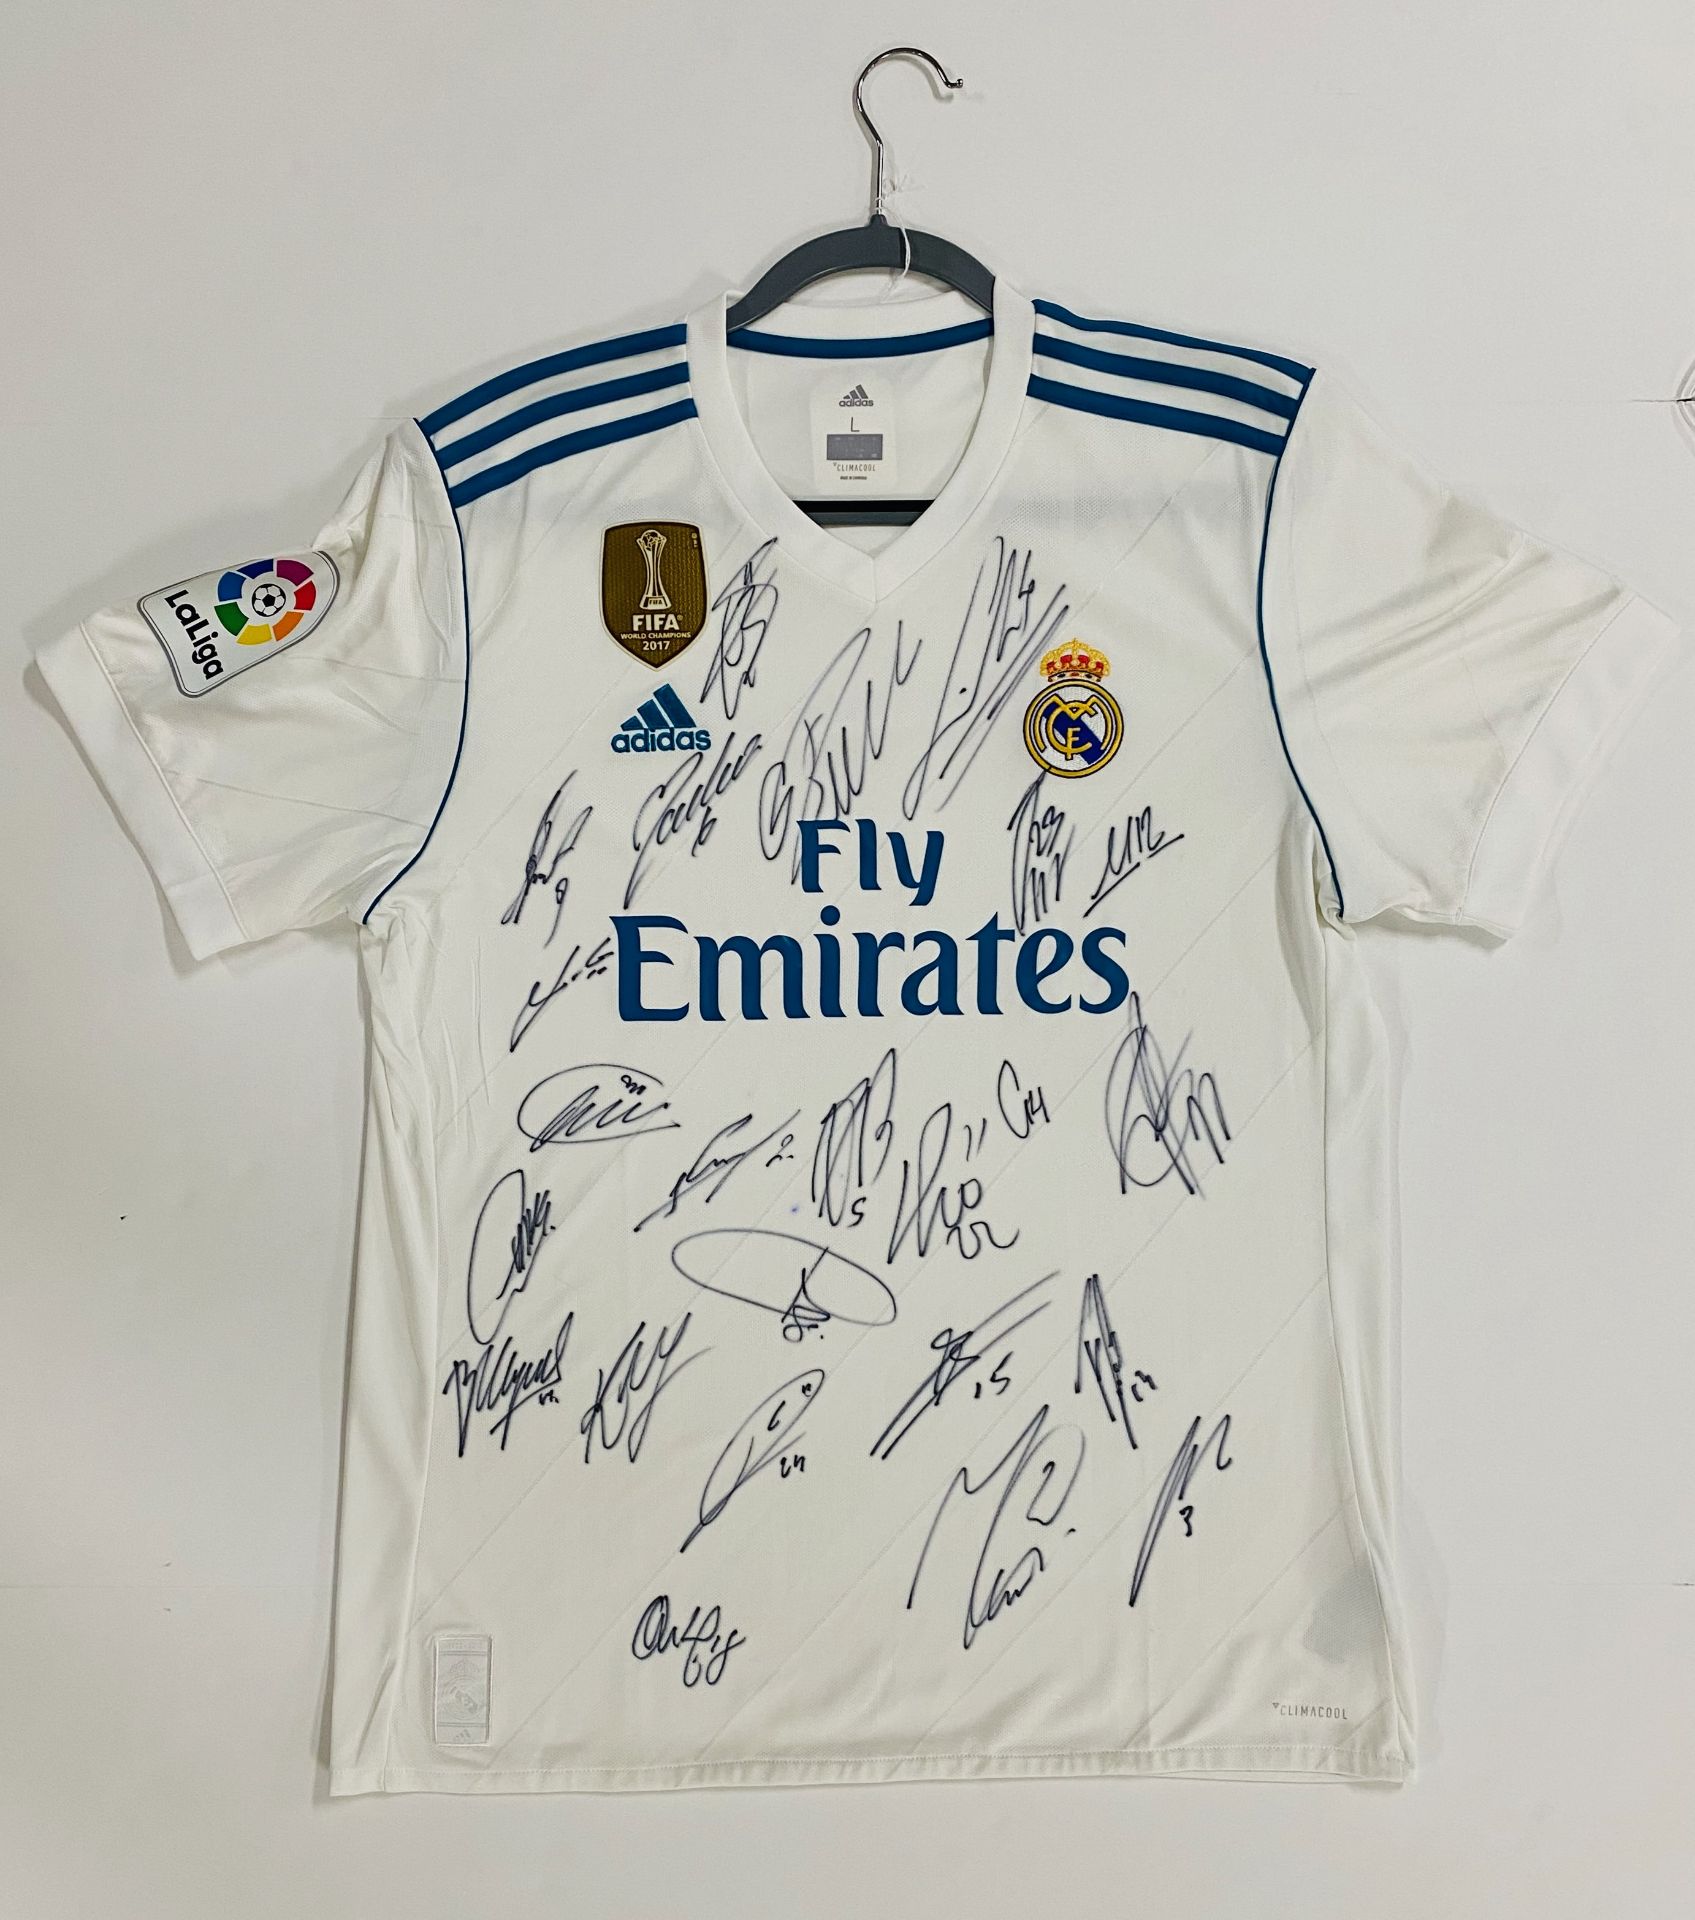 Real Madrid 2018 Champions League winners signed jersey - Image 2 of 3